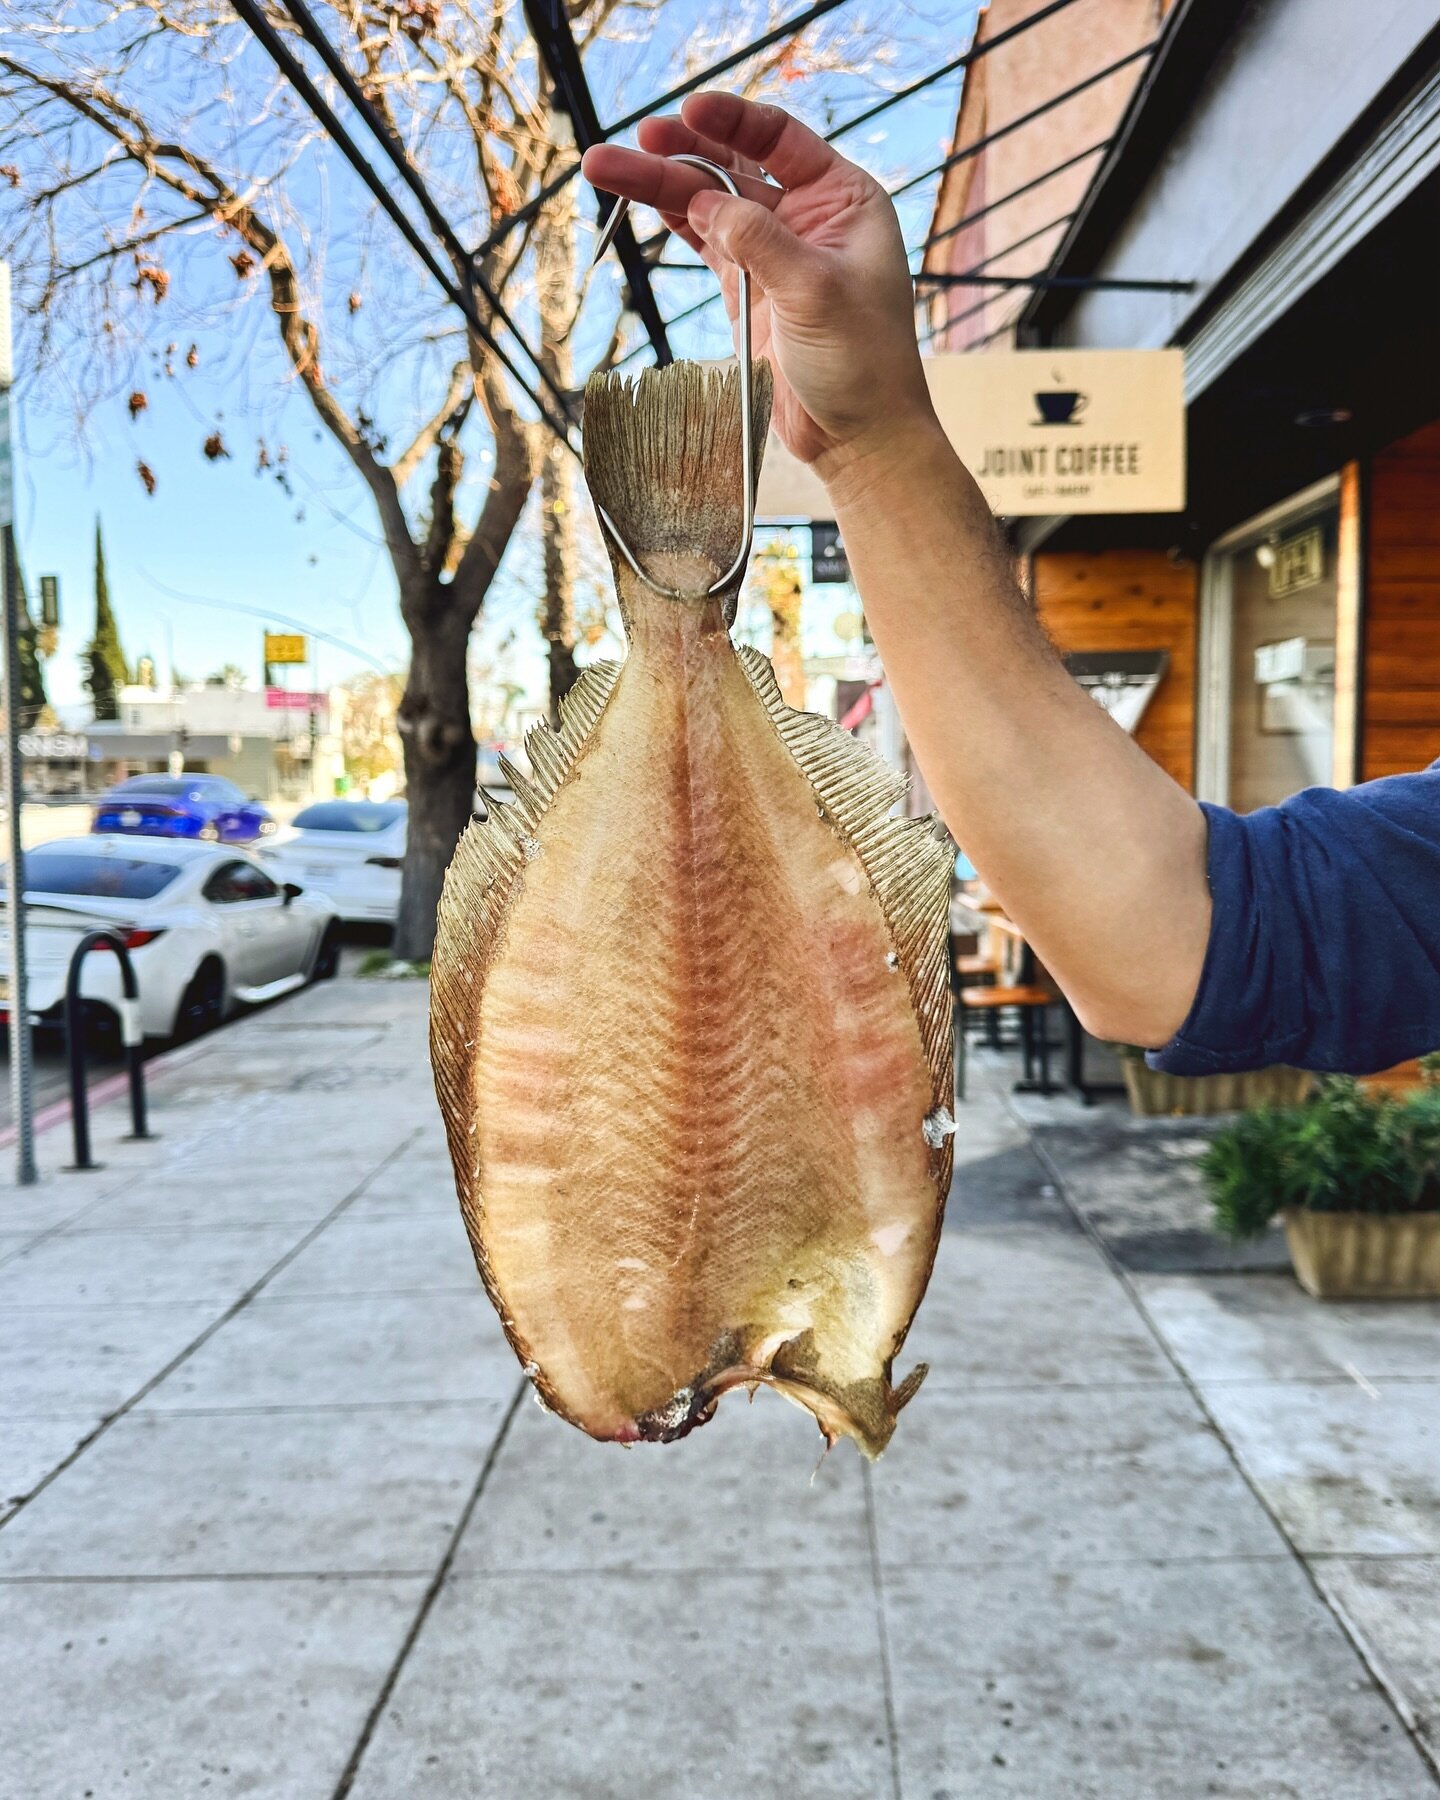 Olive Flounder aka Hirame meat is light/delicate in texture, it carries a mild fish flavor with a sweet finish. Meat found on the main body is lean and silky while muscles closer to the fins are fattier and carry a denser texture.